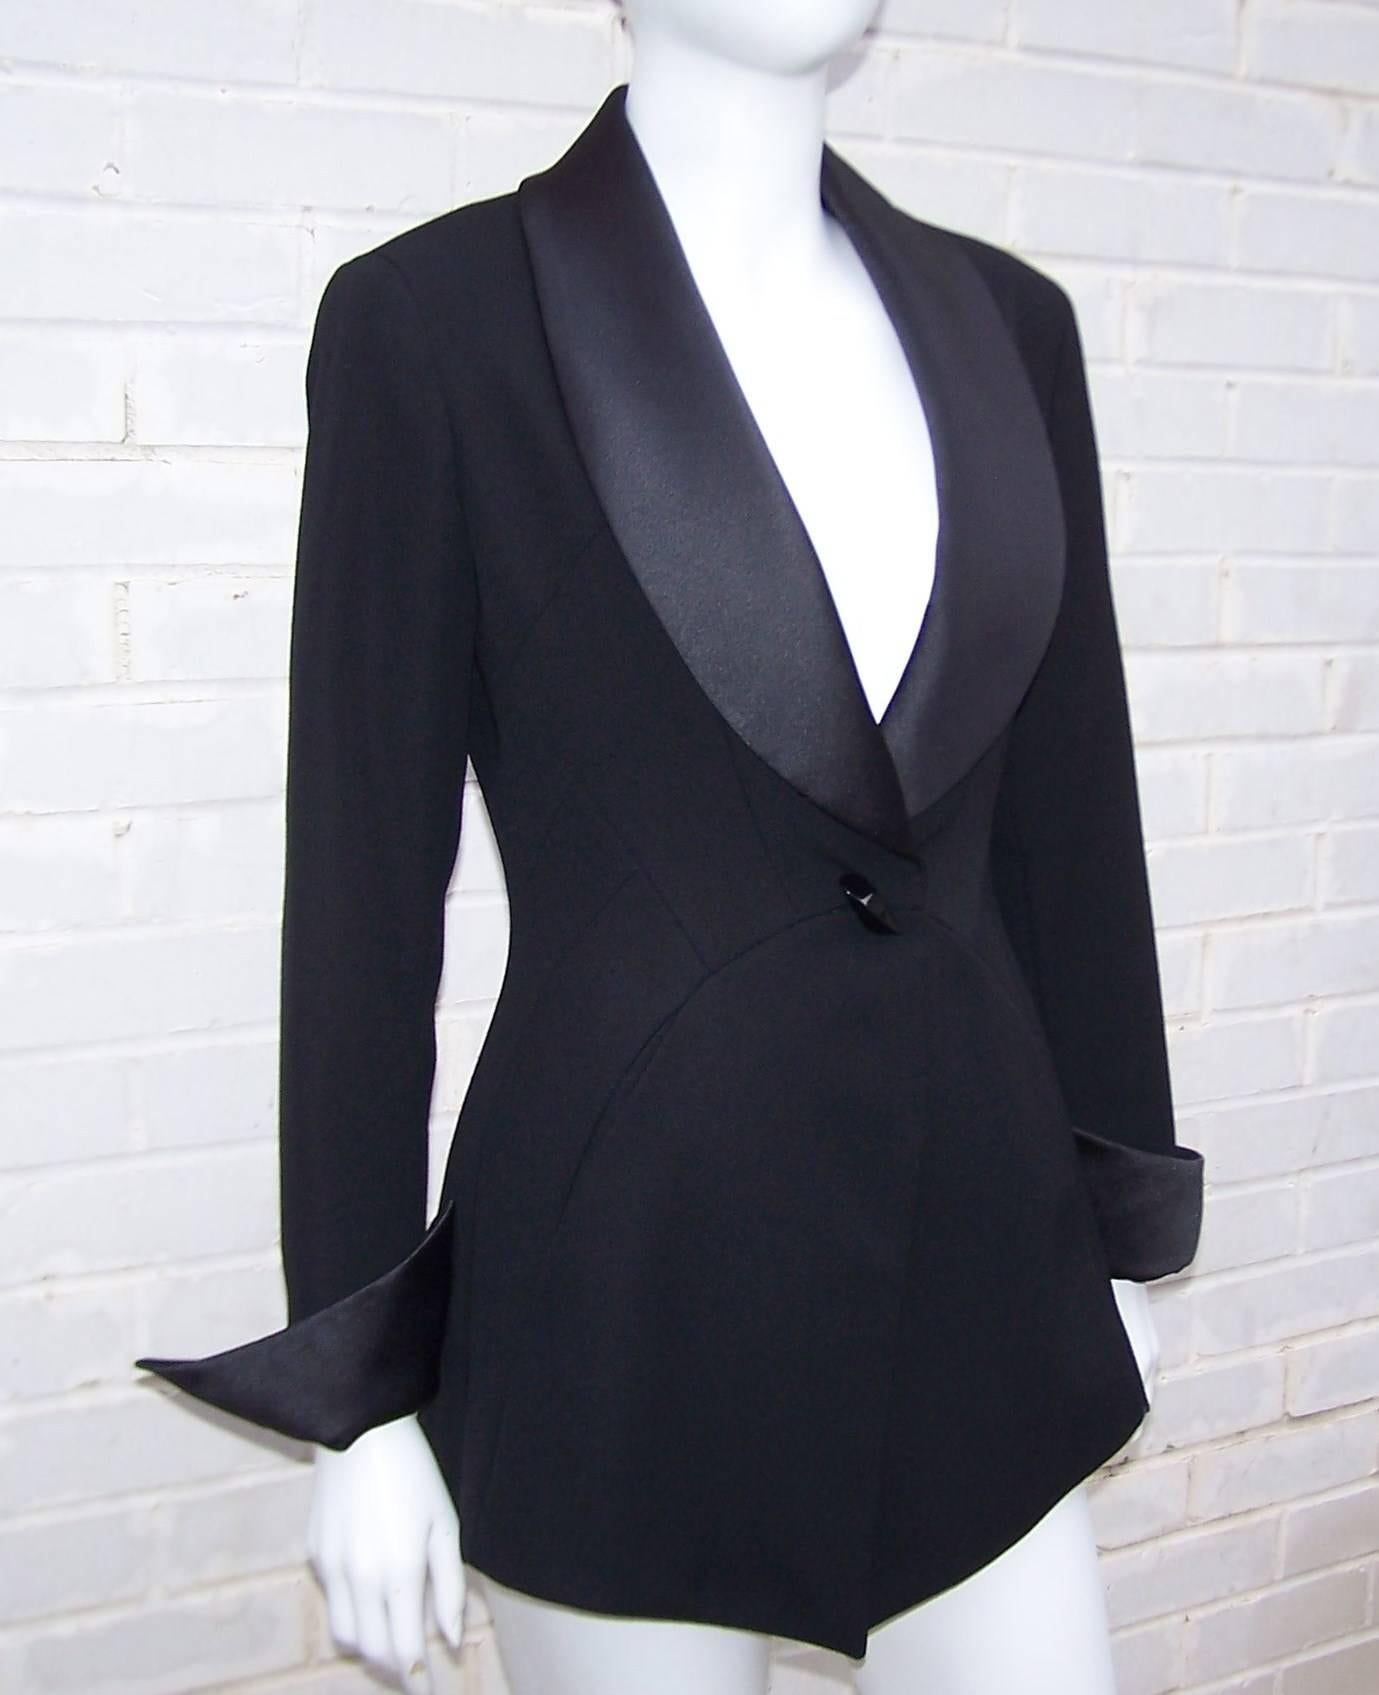 A well executed design is timeless, classic and yet always dynamic...such is this tuxedo jacket by Claude Montana.  The detailed construction is evident in the seaming both at the front and back with the addition of side pockets and an elongated